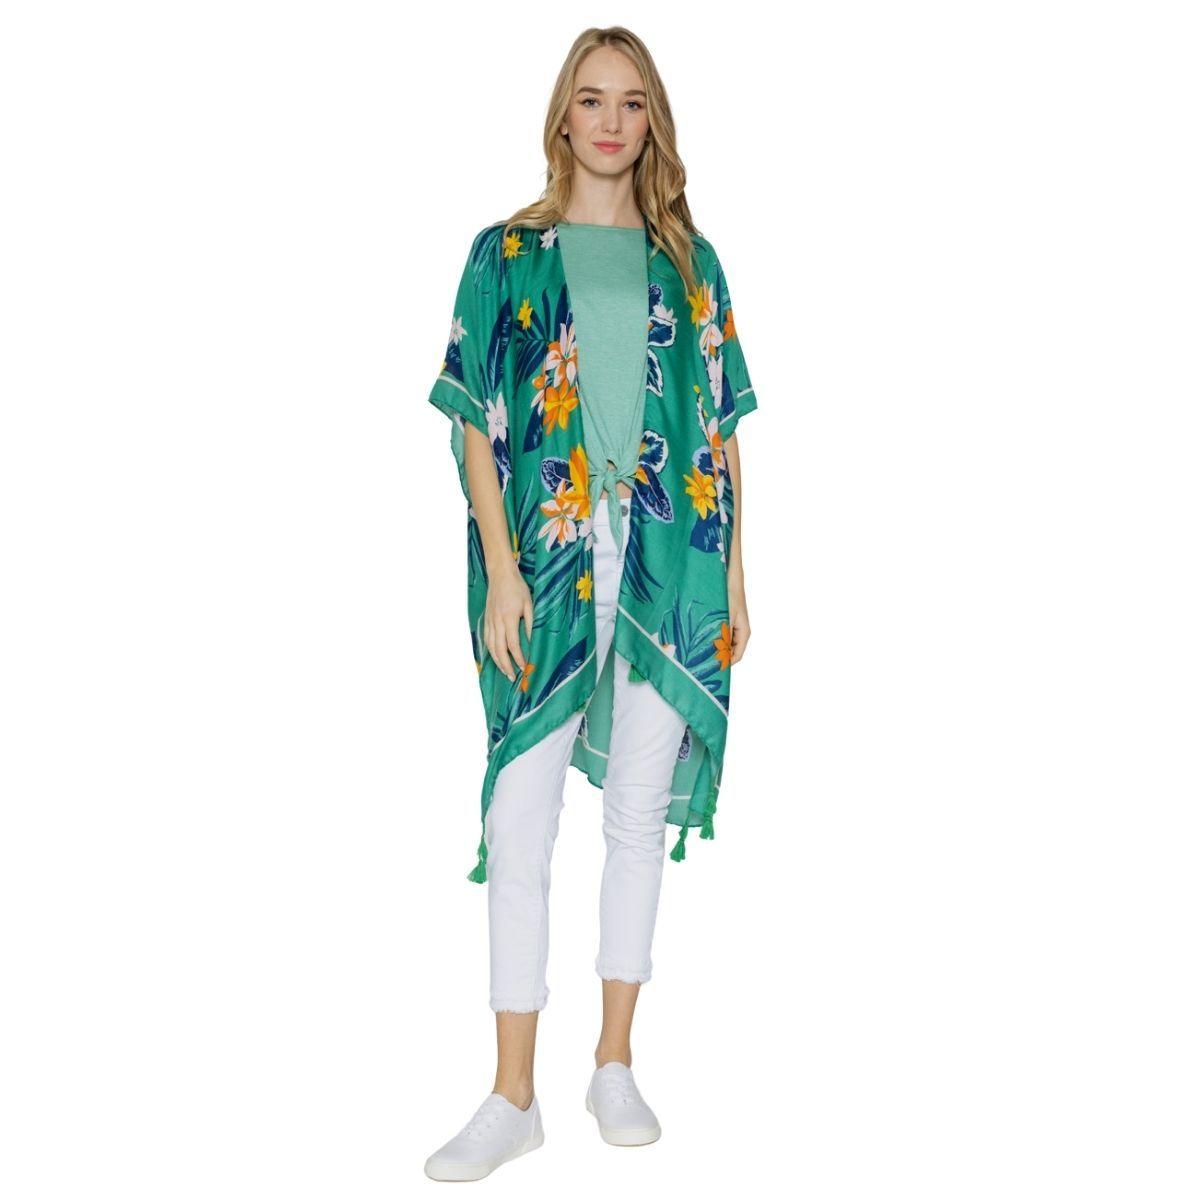 Stay Stylish and Chic with Our Green Kimono Floral Top